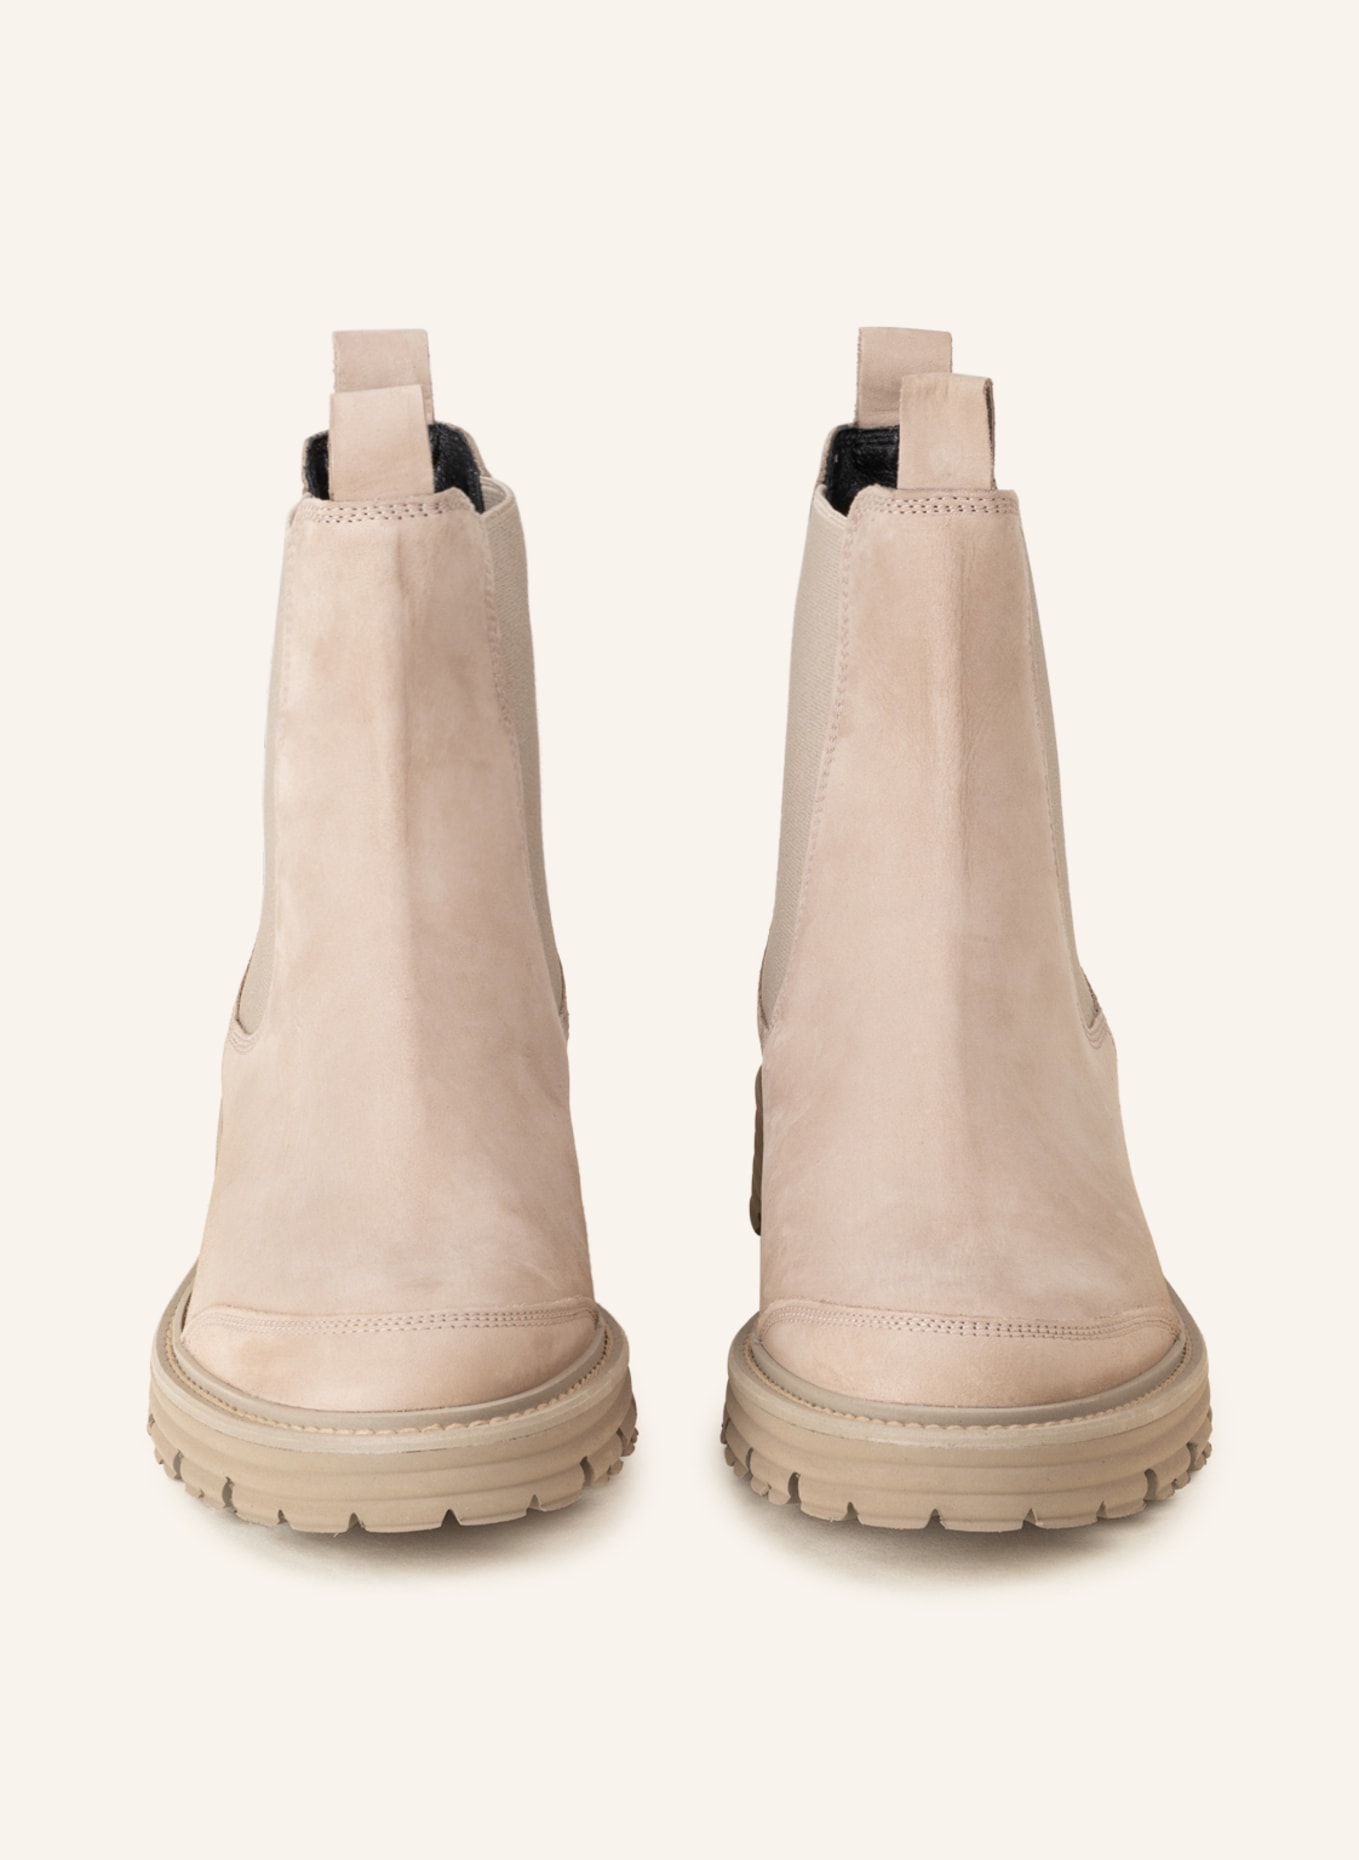 KENNEL & SCHMENGER Chelsea-Boots POWER, Farbe: TAUPE (Bild 3)